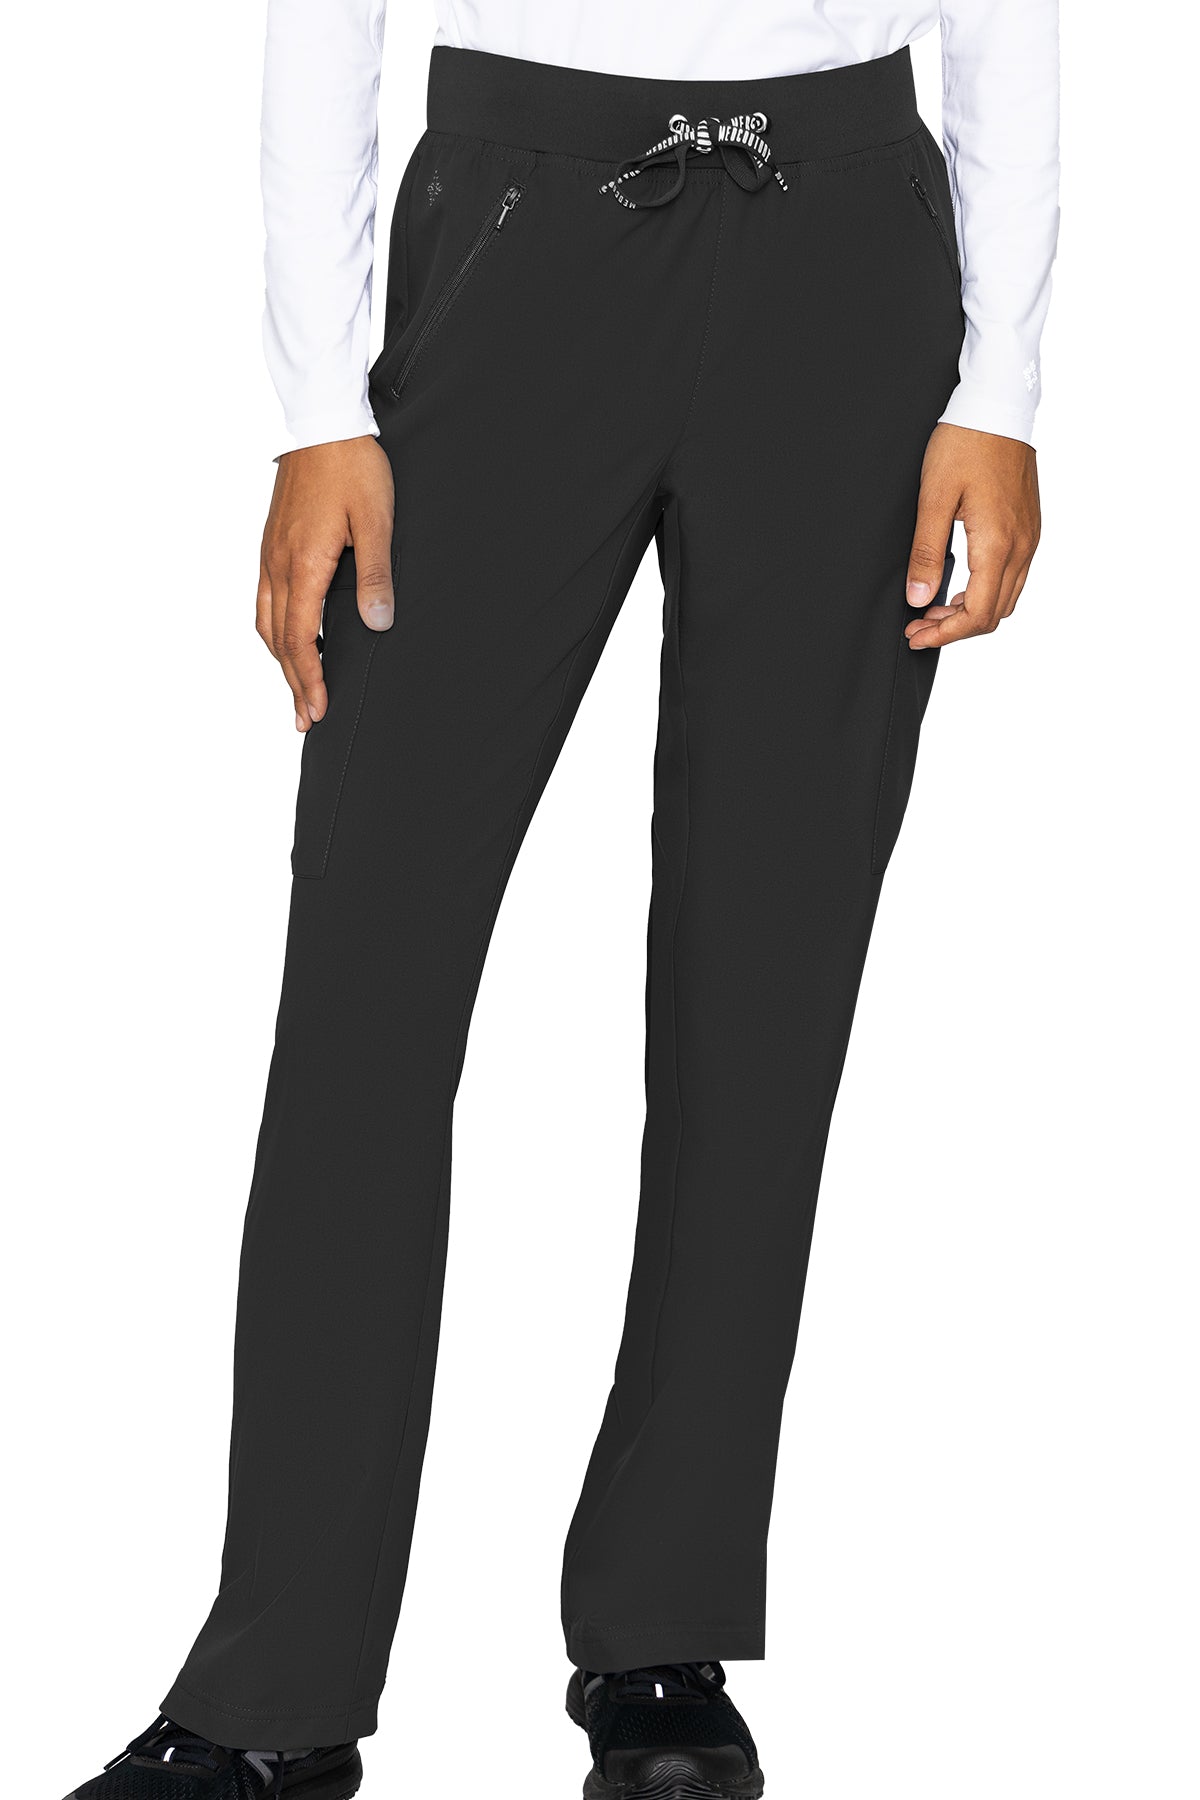 Med Couture Tall Scrub Pants Insight Zipper Pant in Black at Parker's Clothing and Shoes.